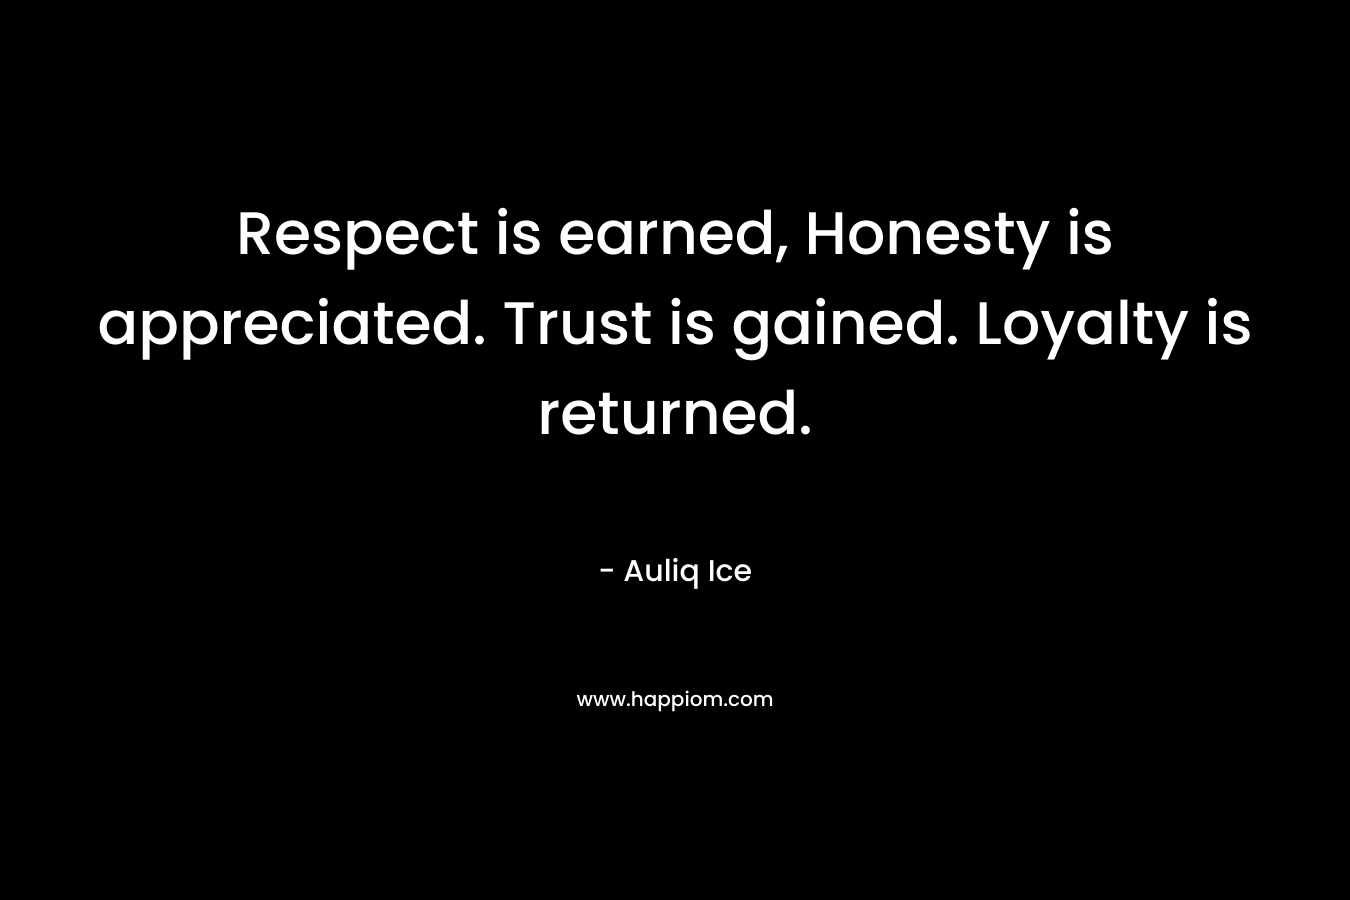 Respect is earned, Honesty is appreciated. Trust is gained. Loyalty is returned.